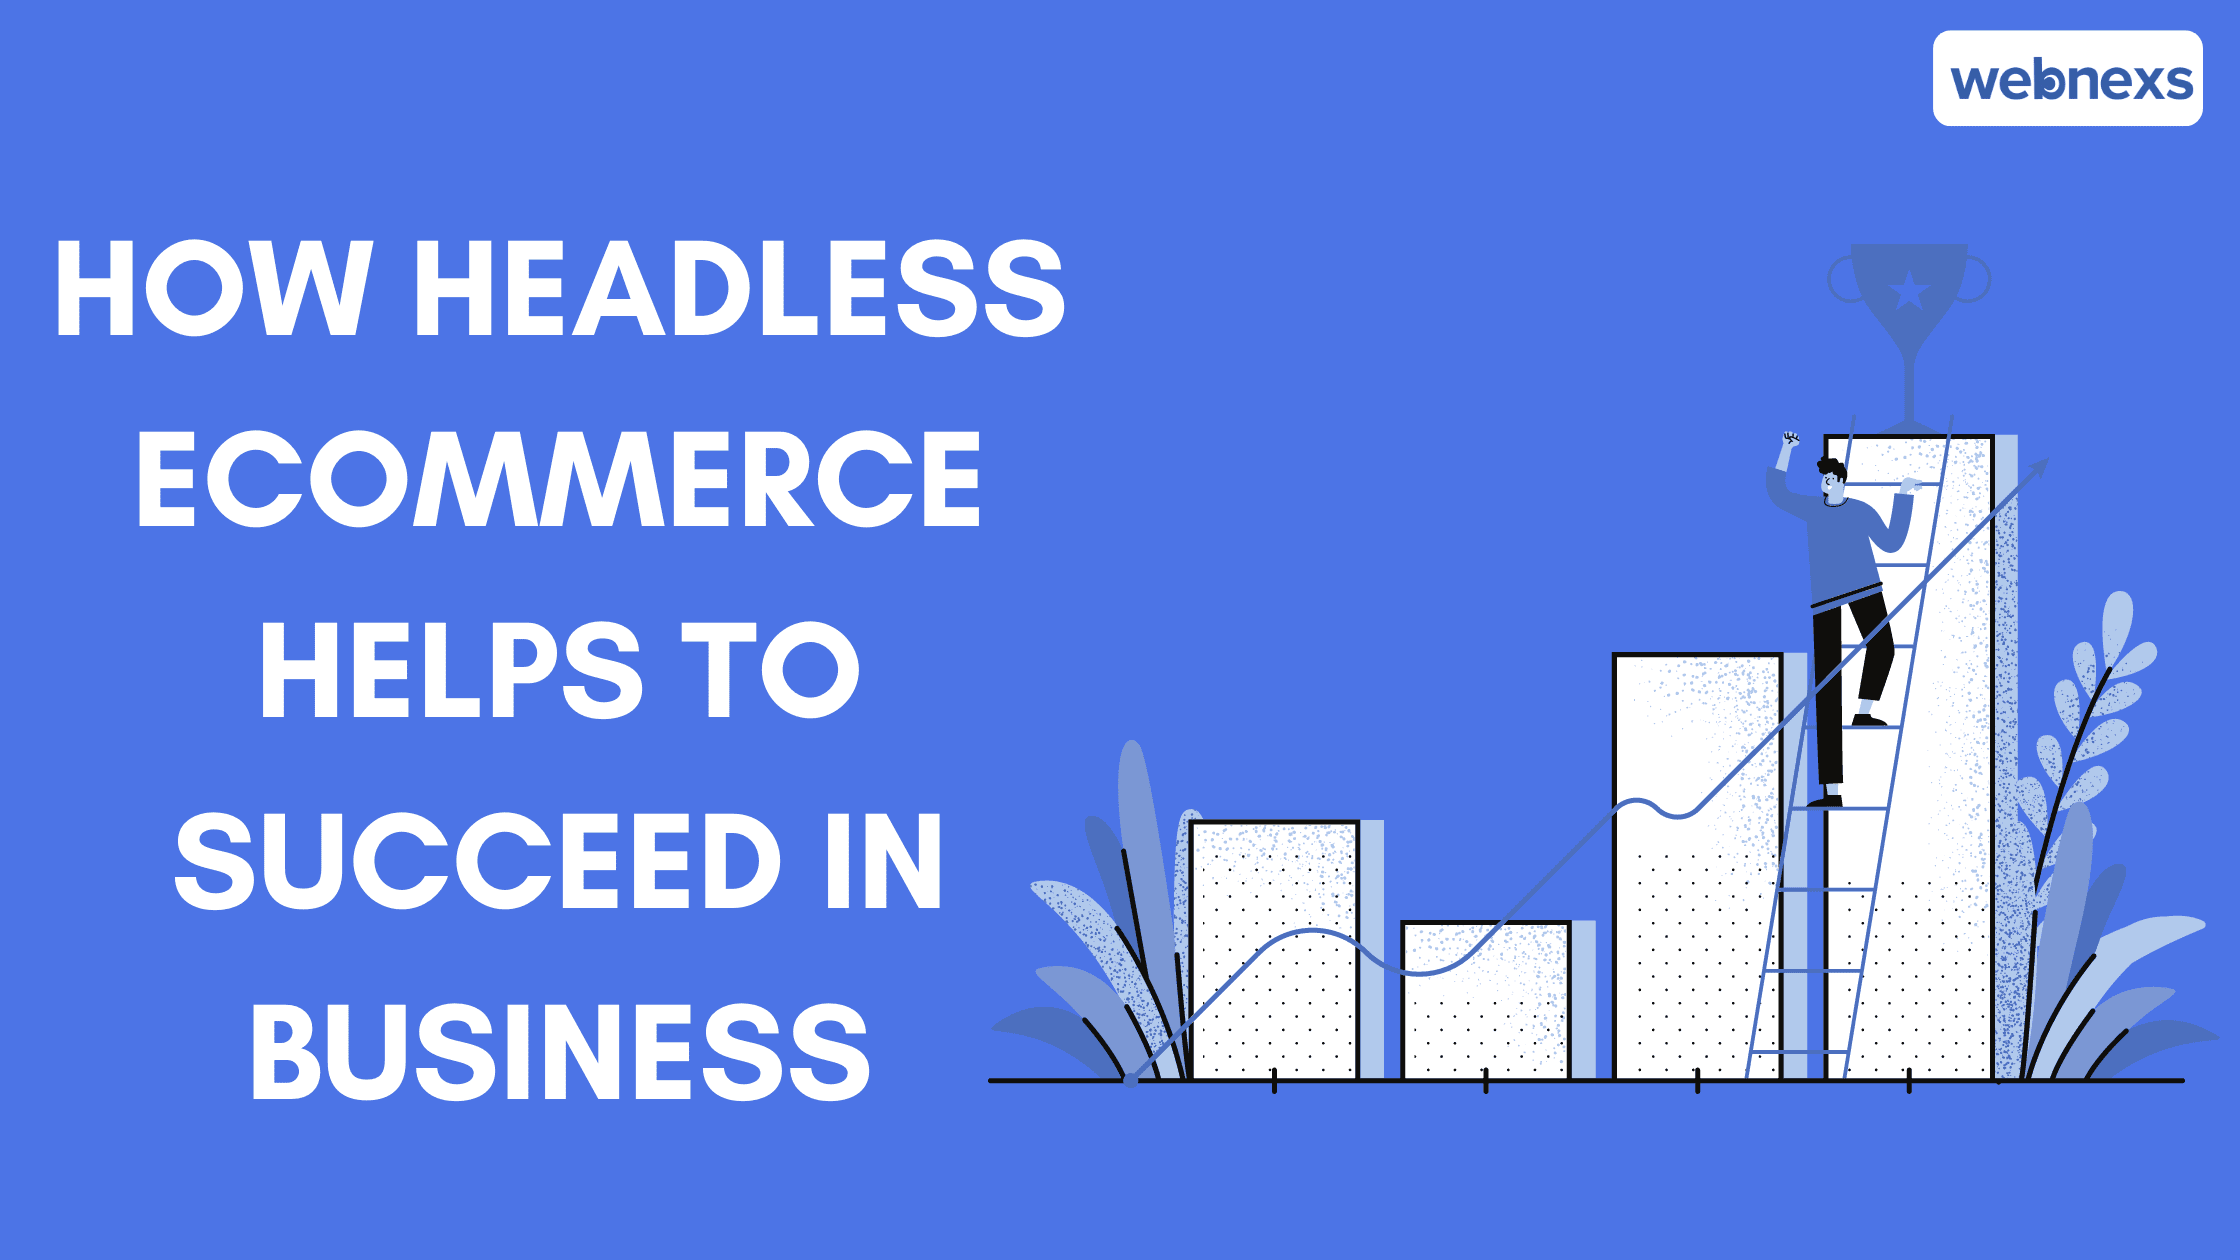 How does Headless Ecommerce Help To Succeed In Business?